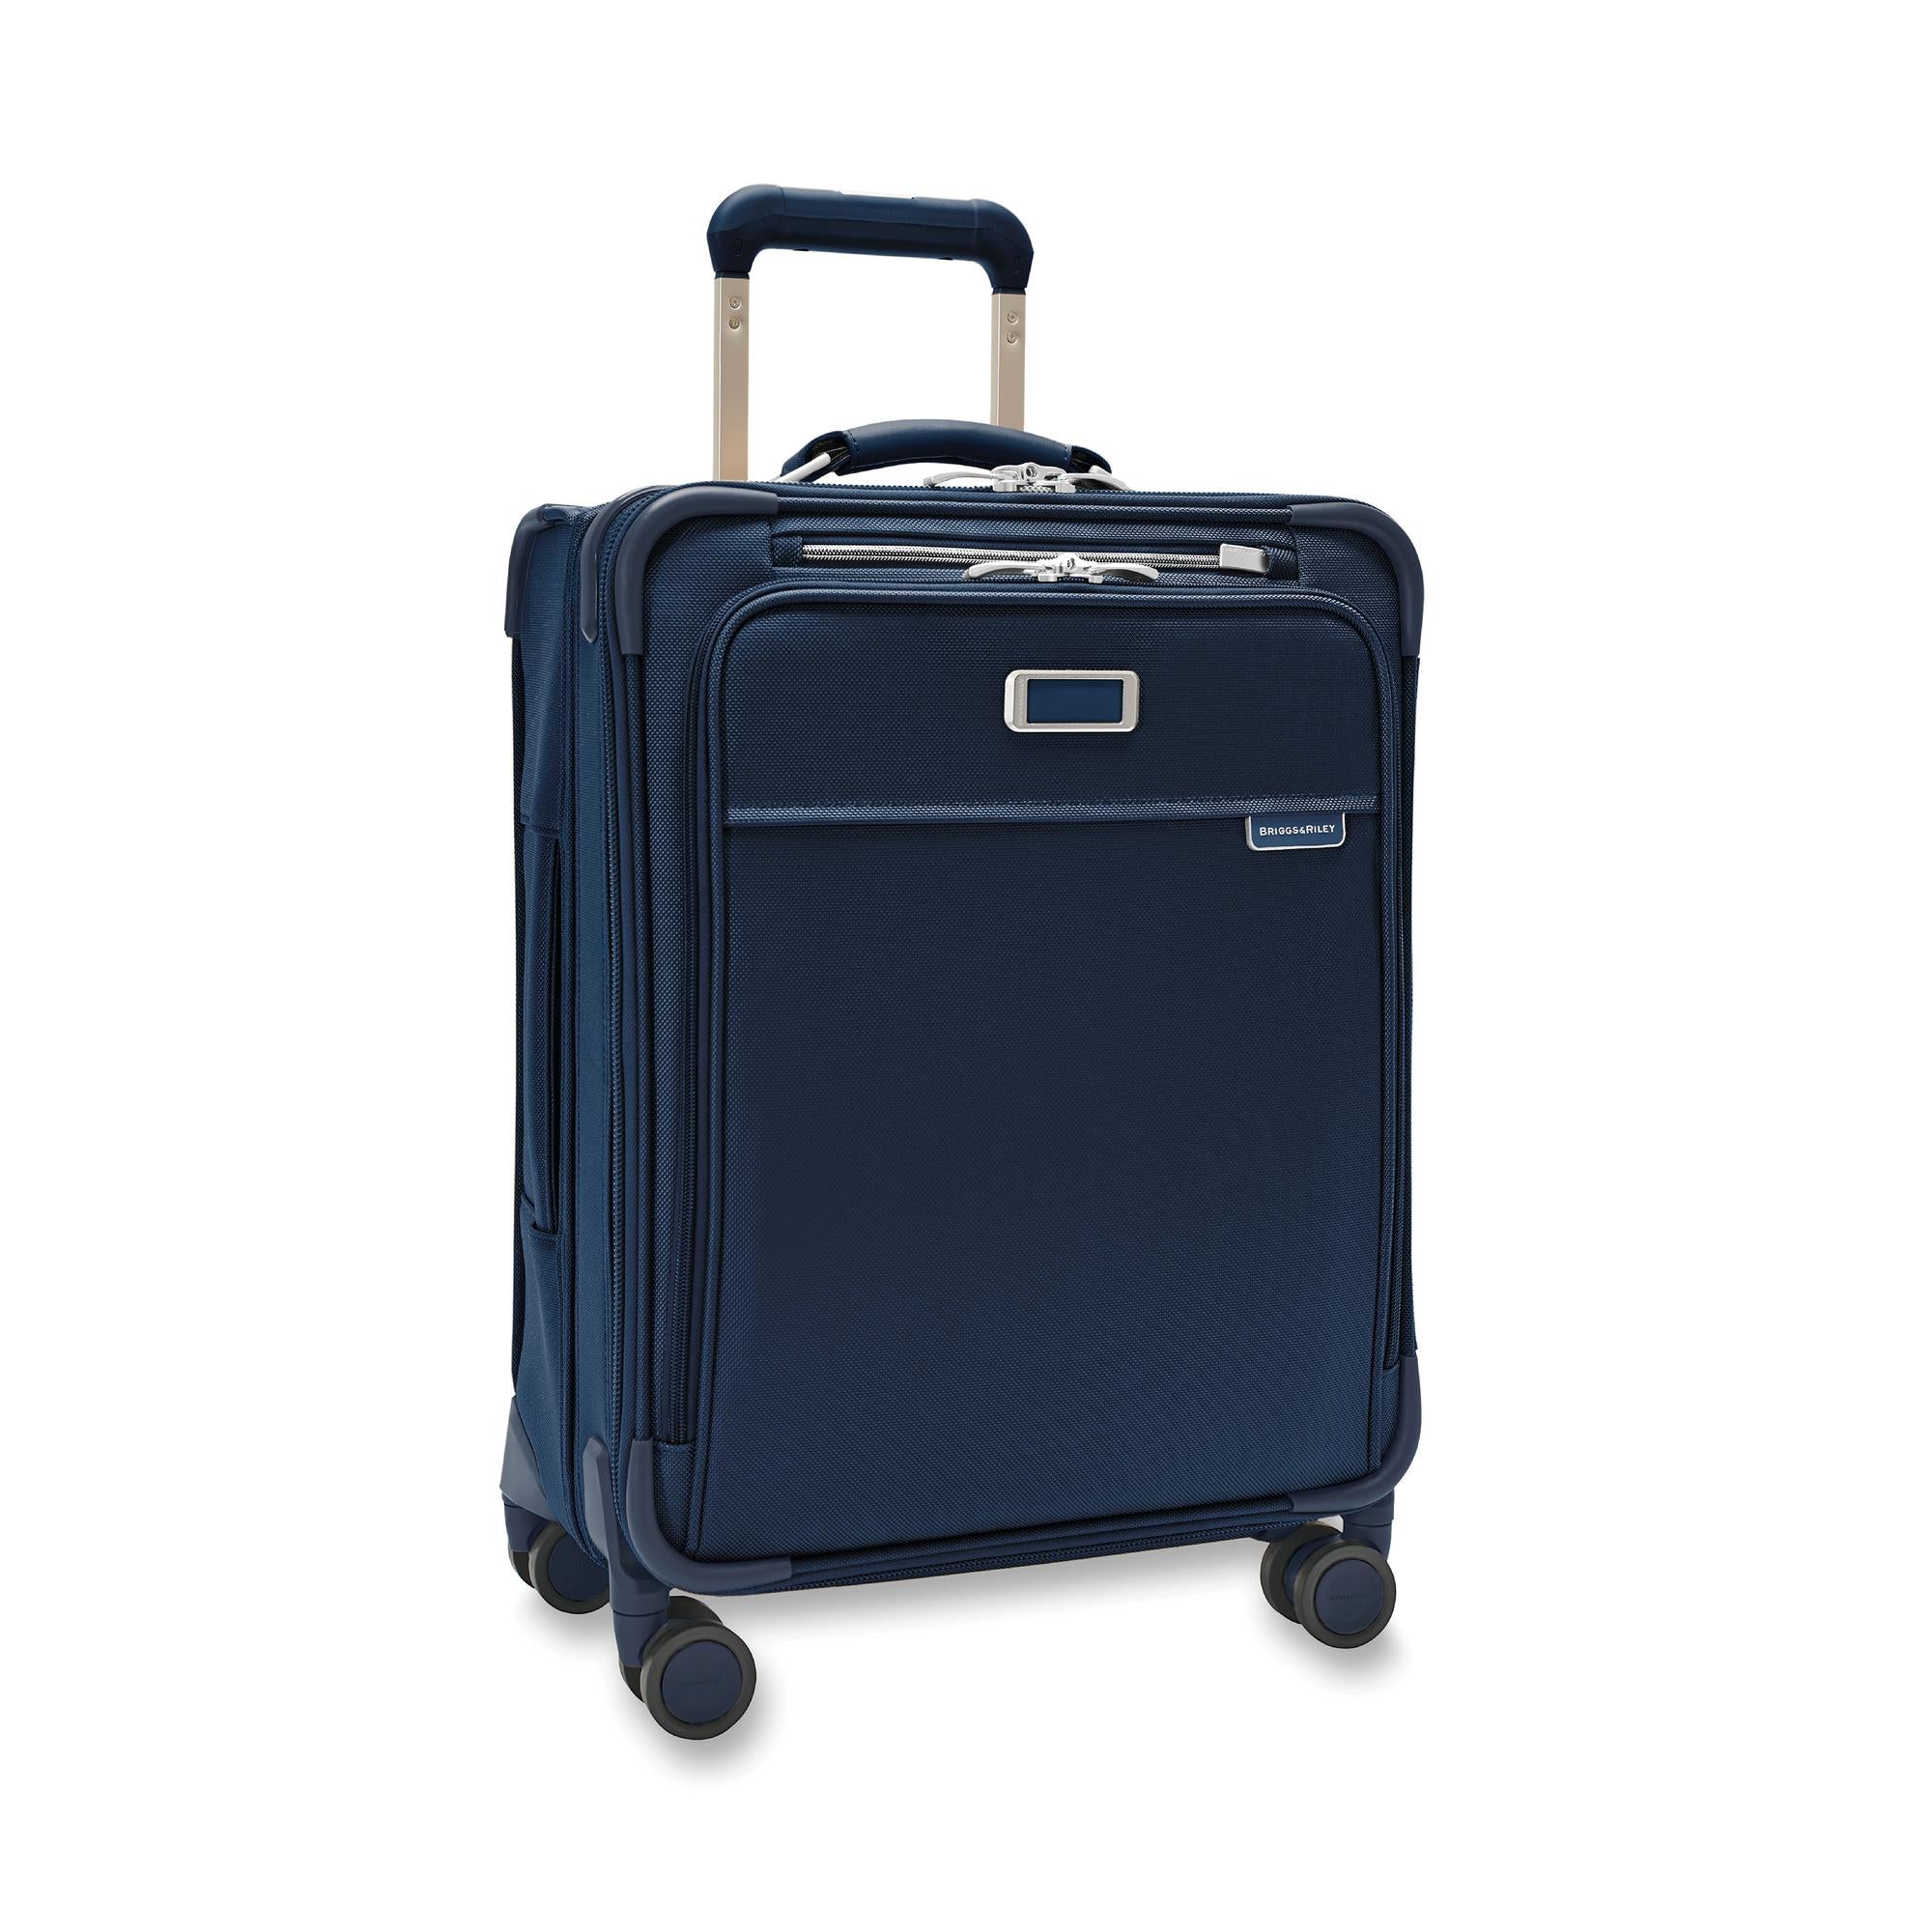 Briggs & Riley Baseline Global Carry-On Spinner – Luggage Pros